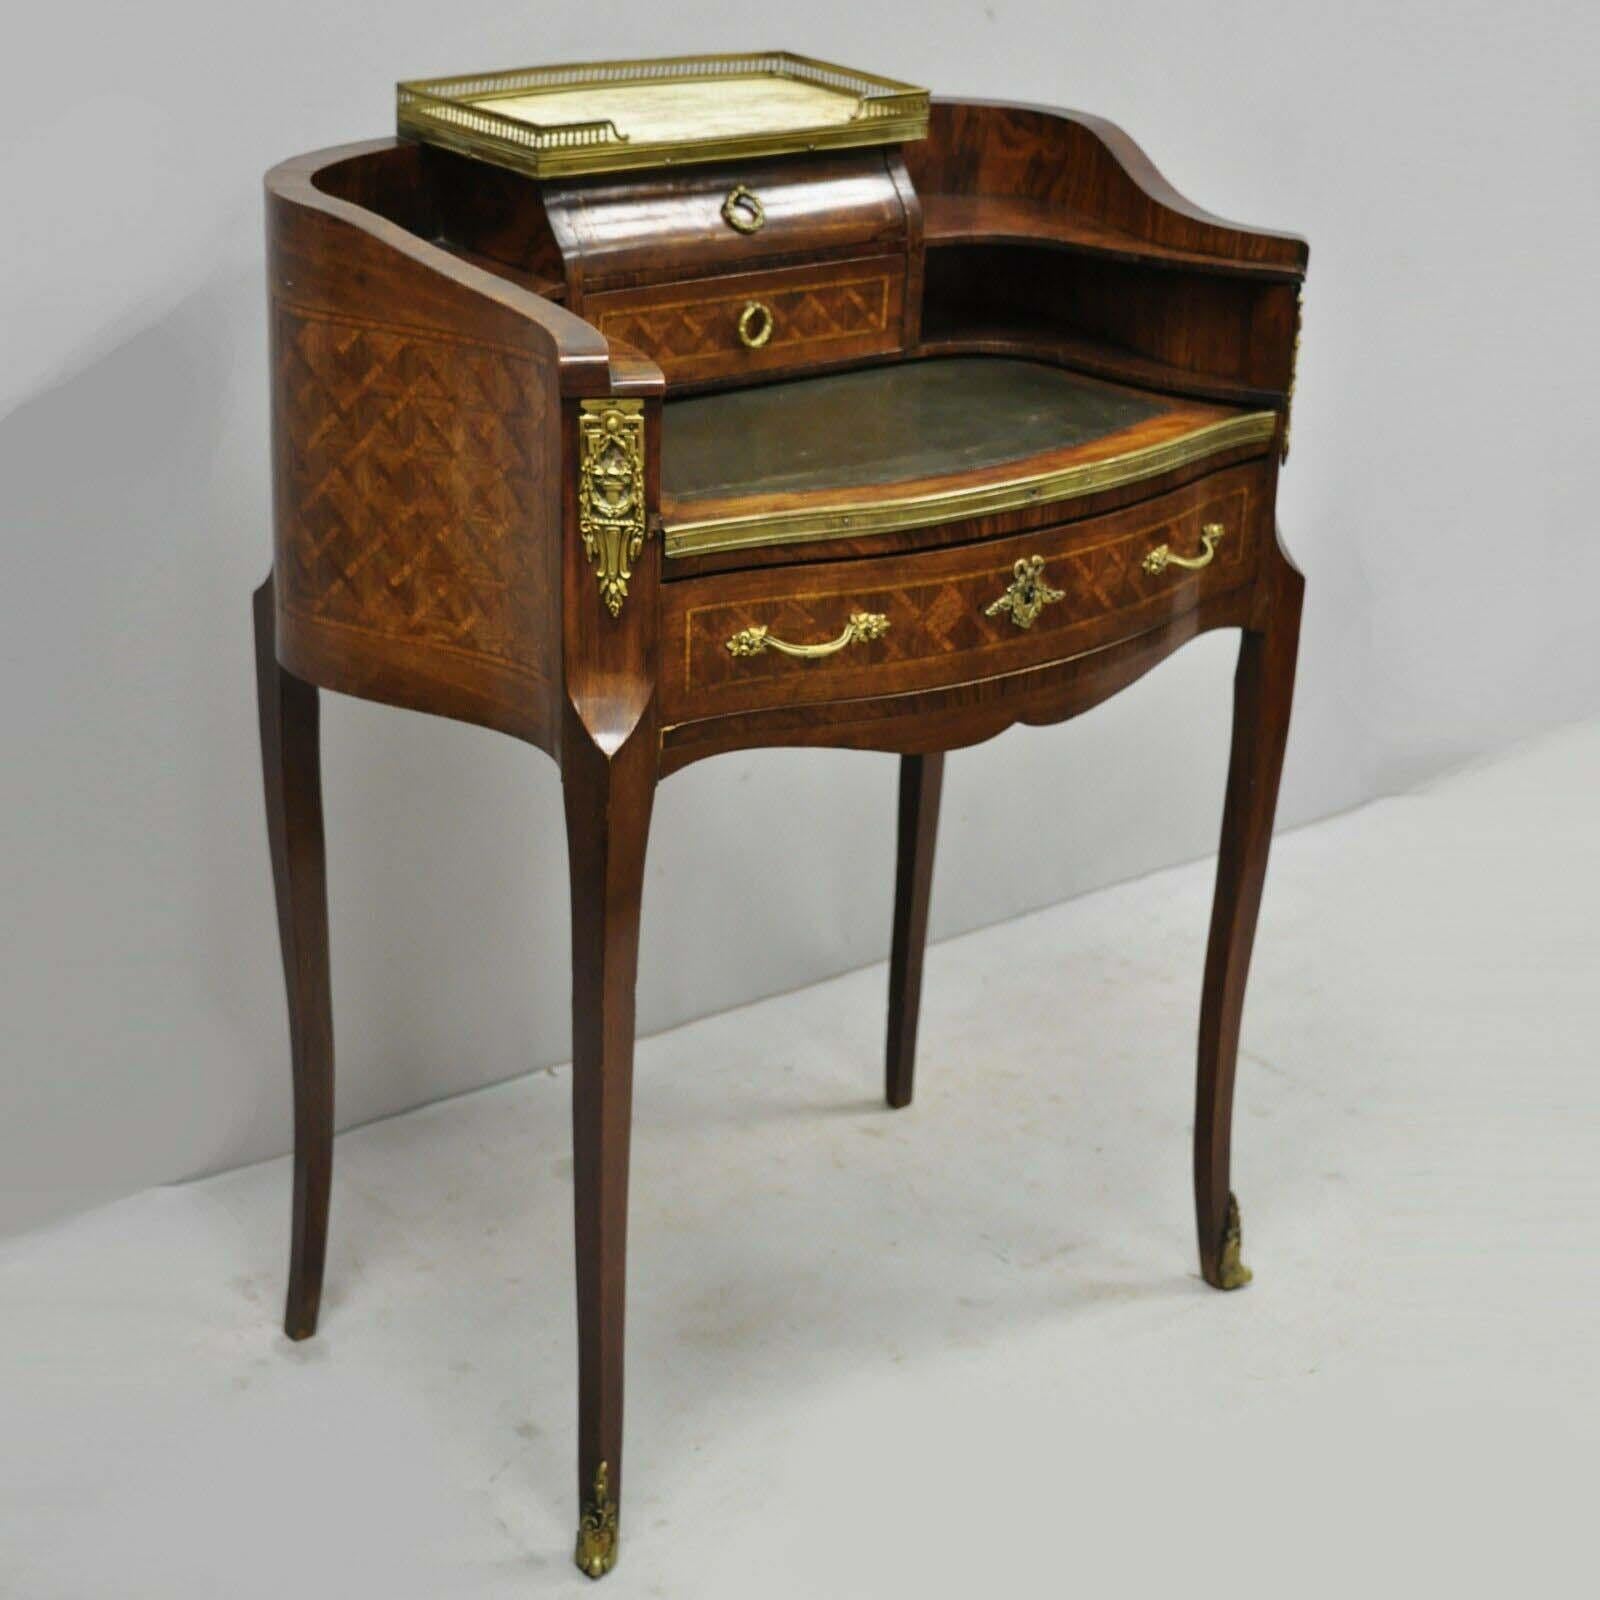 Antique French Louis XV style small inlaid petite Demilune writing desk, made in France. Item features marble top, green leather pullout or pull-out writing surface, inlaid all the way around, bronze ormolu, no key, but unlocked, 3 dovetail drawers,